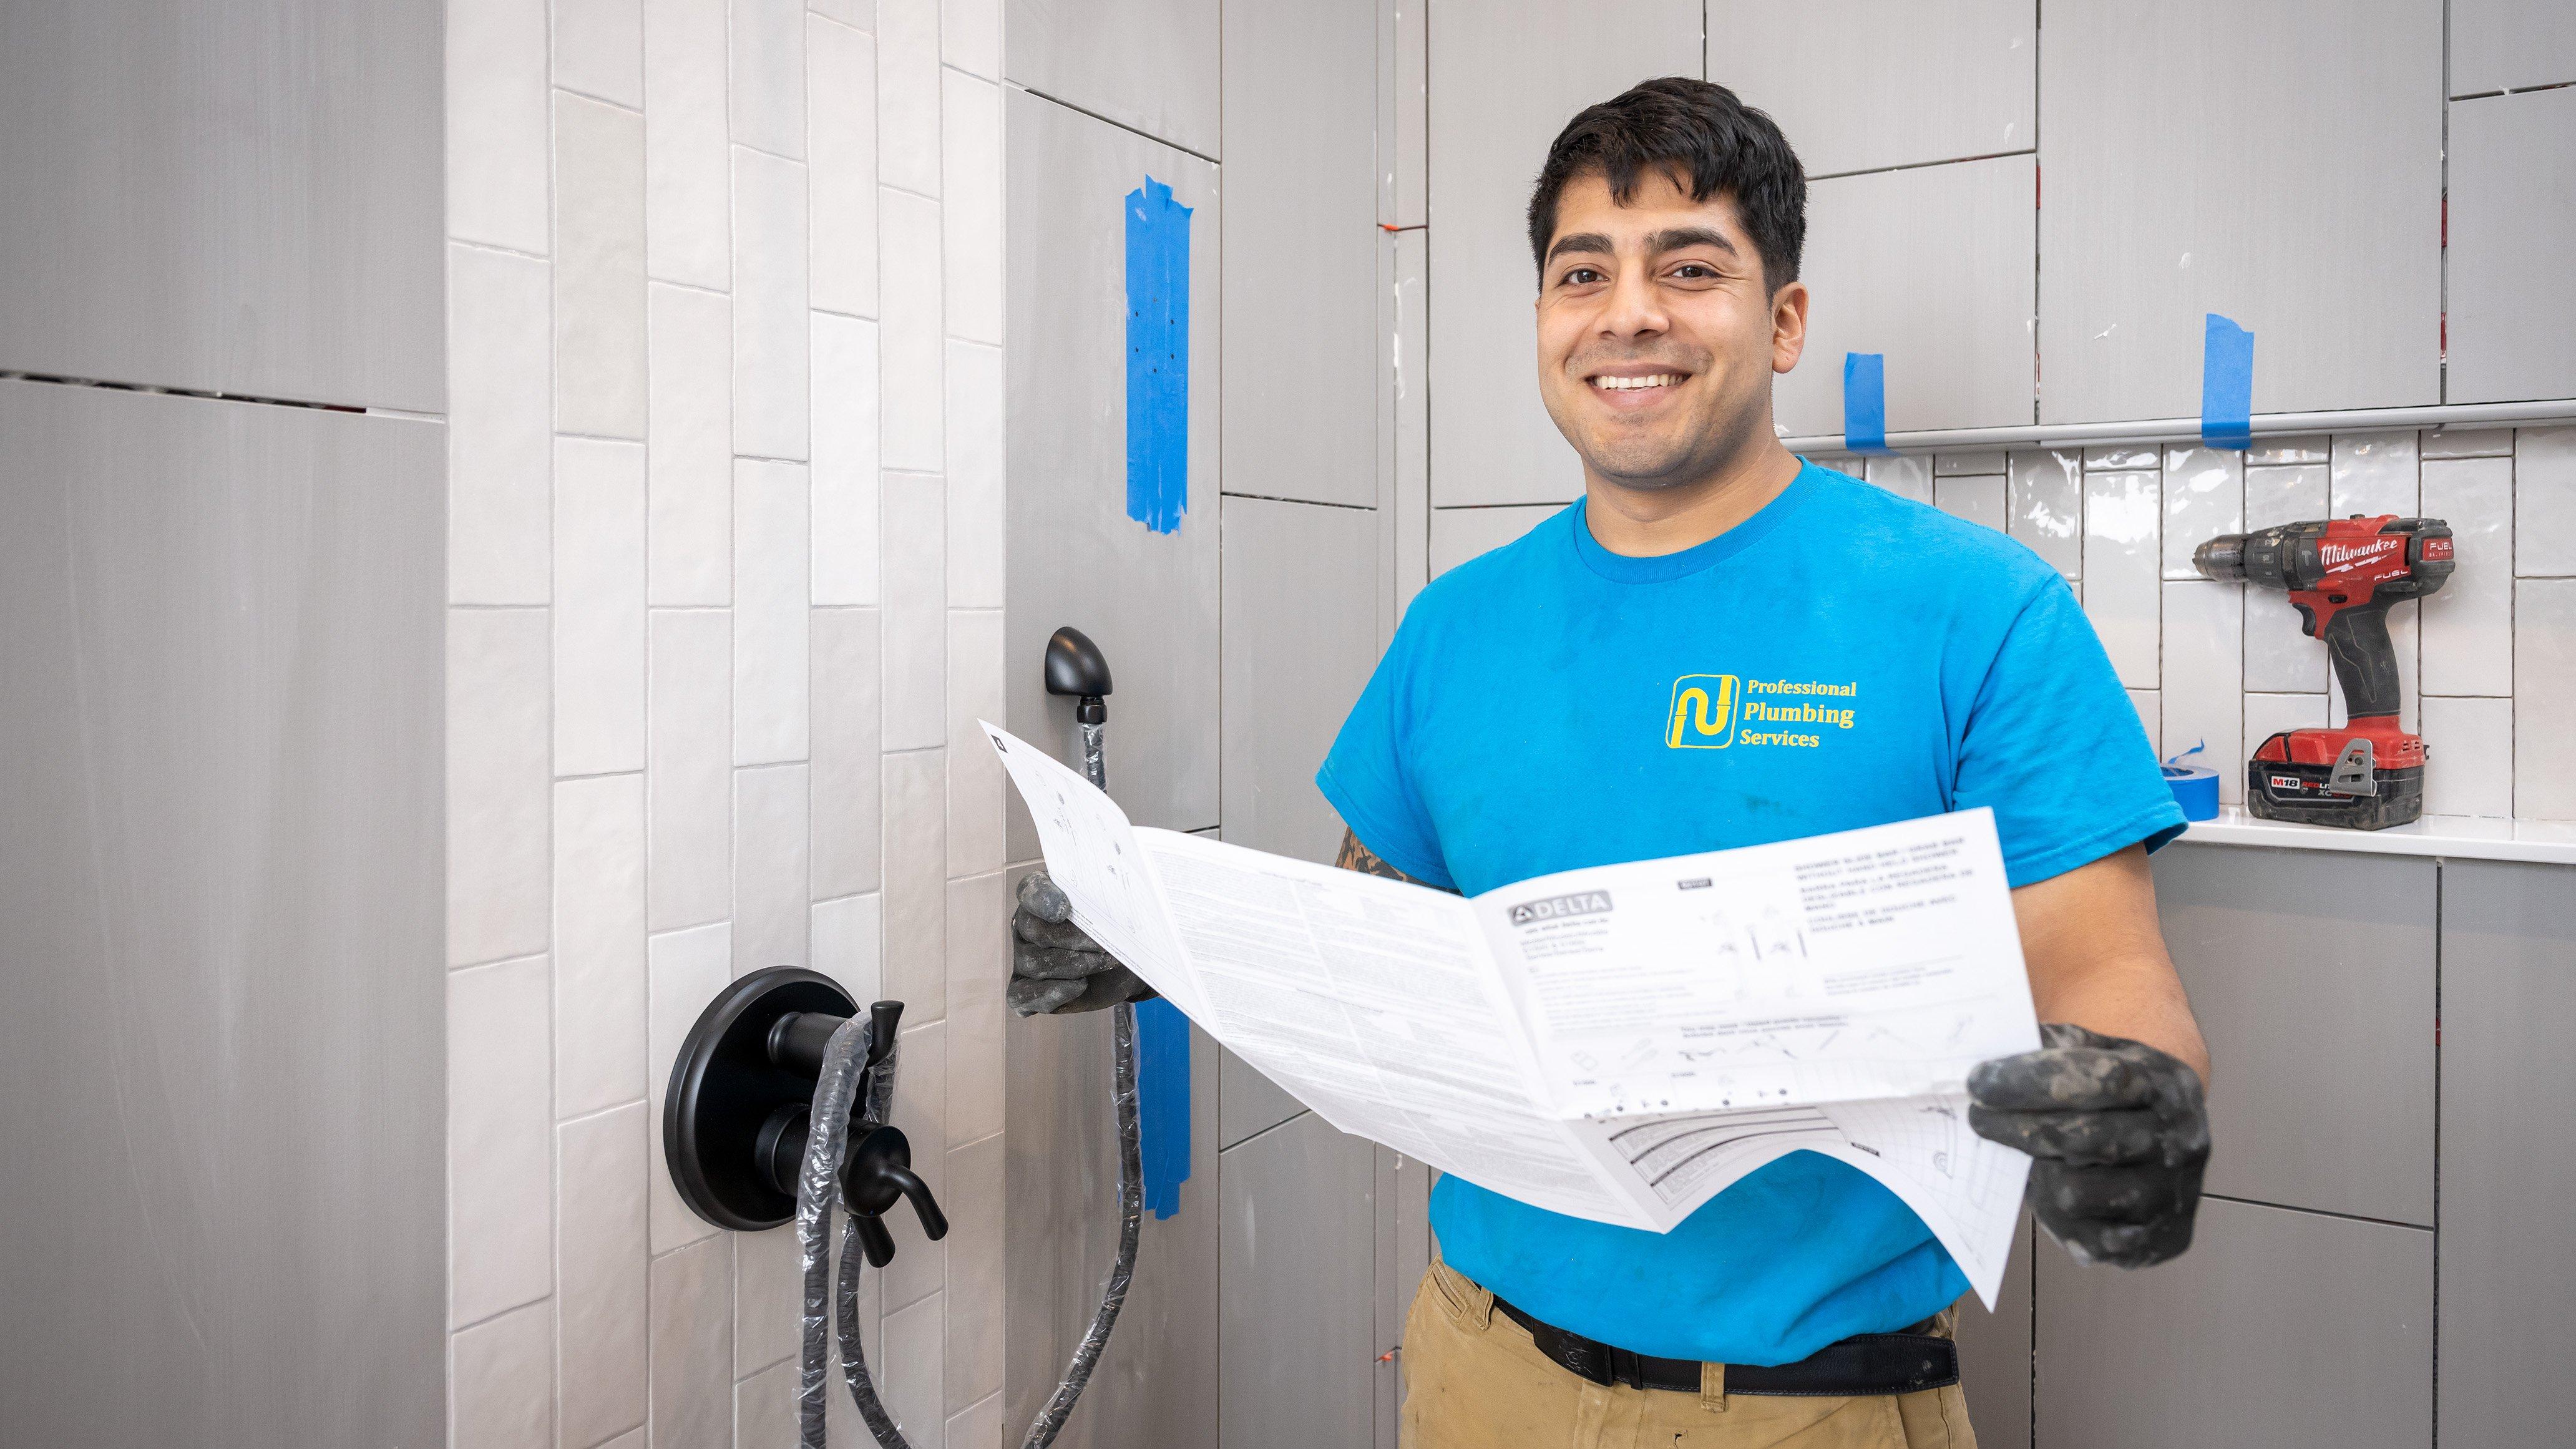 A plumber installs shower equipment in a remodeled bathroom.